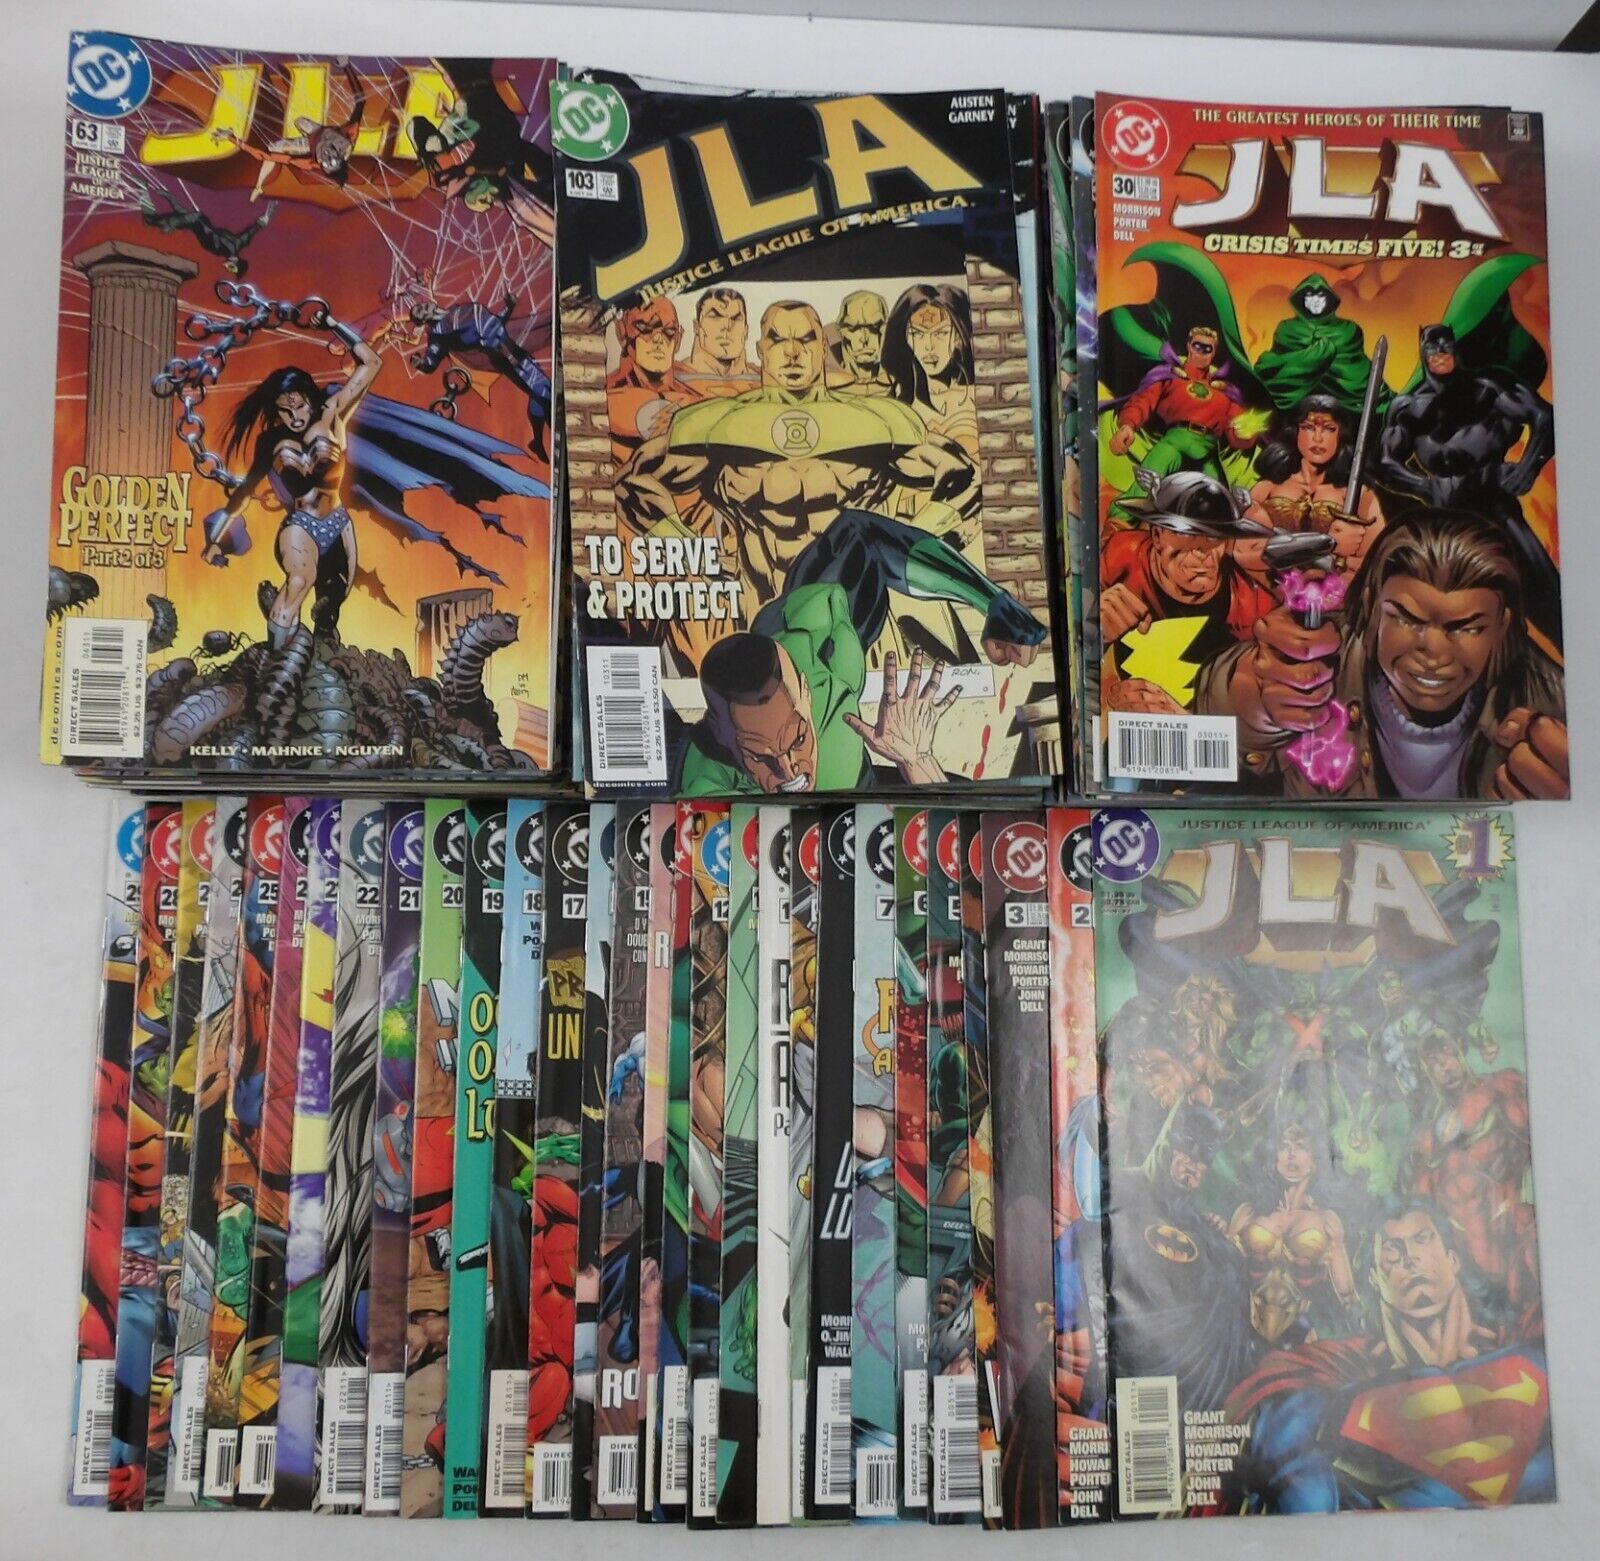 JLA #1-125 VF/NM complete series + (4) Annuals + (3) 80 Page Giants + 1,000,000